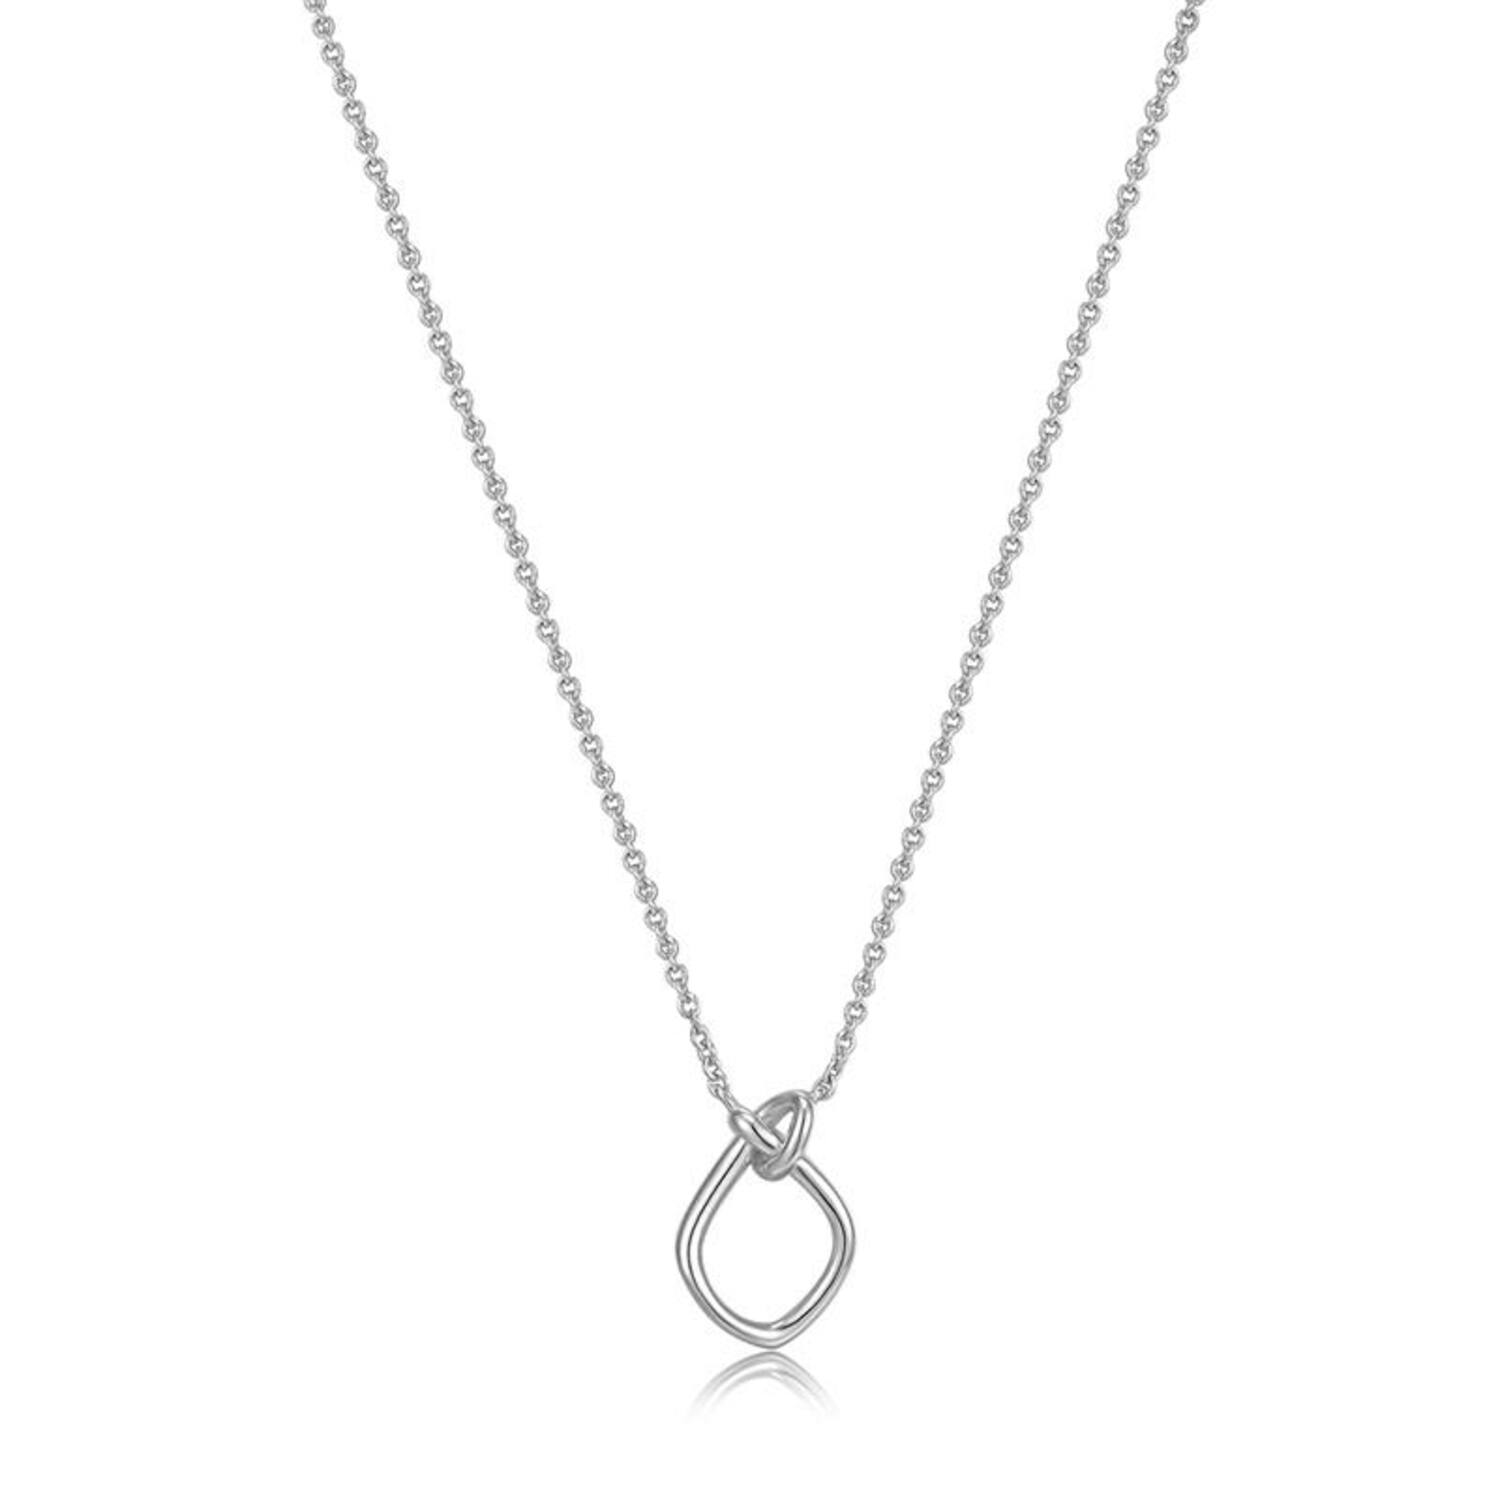 Forget Me Knot - Necklace - 40 - 45cm